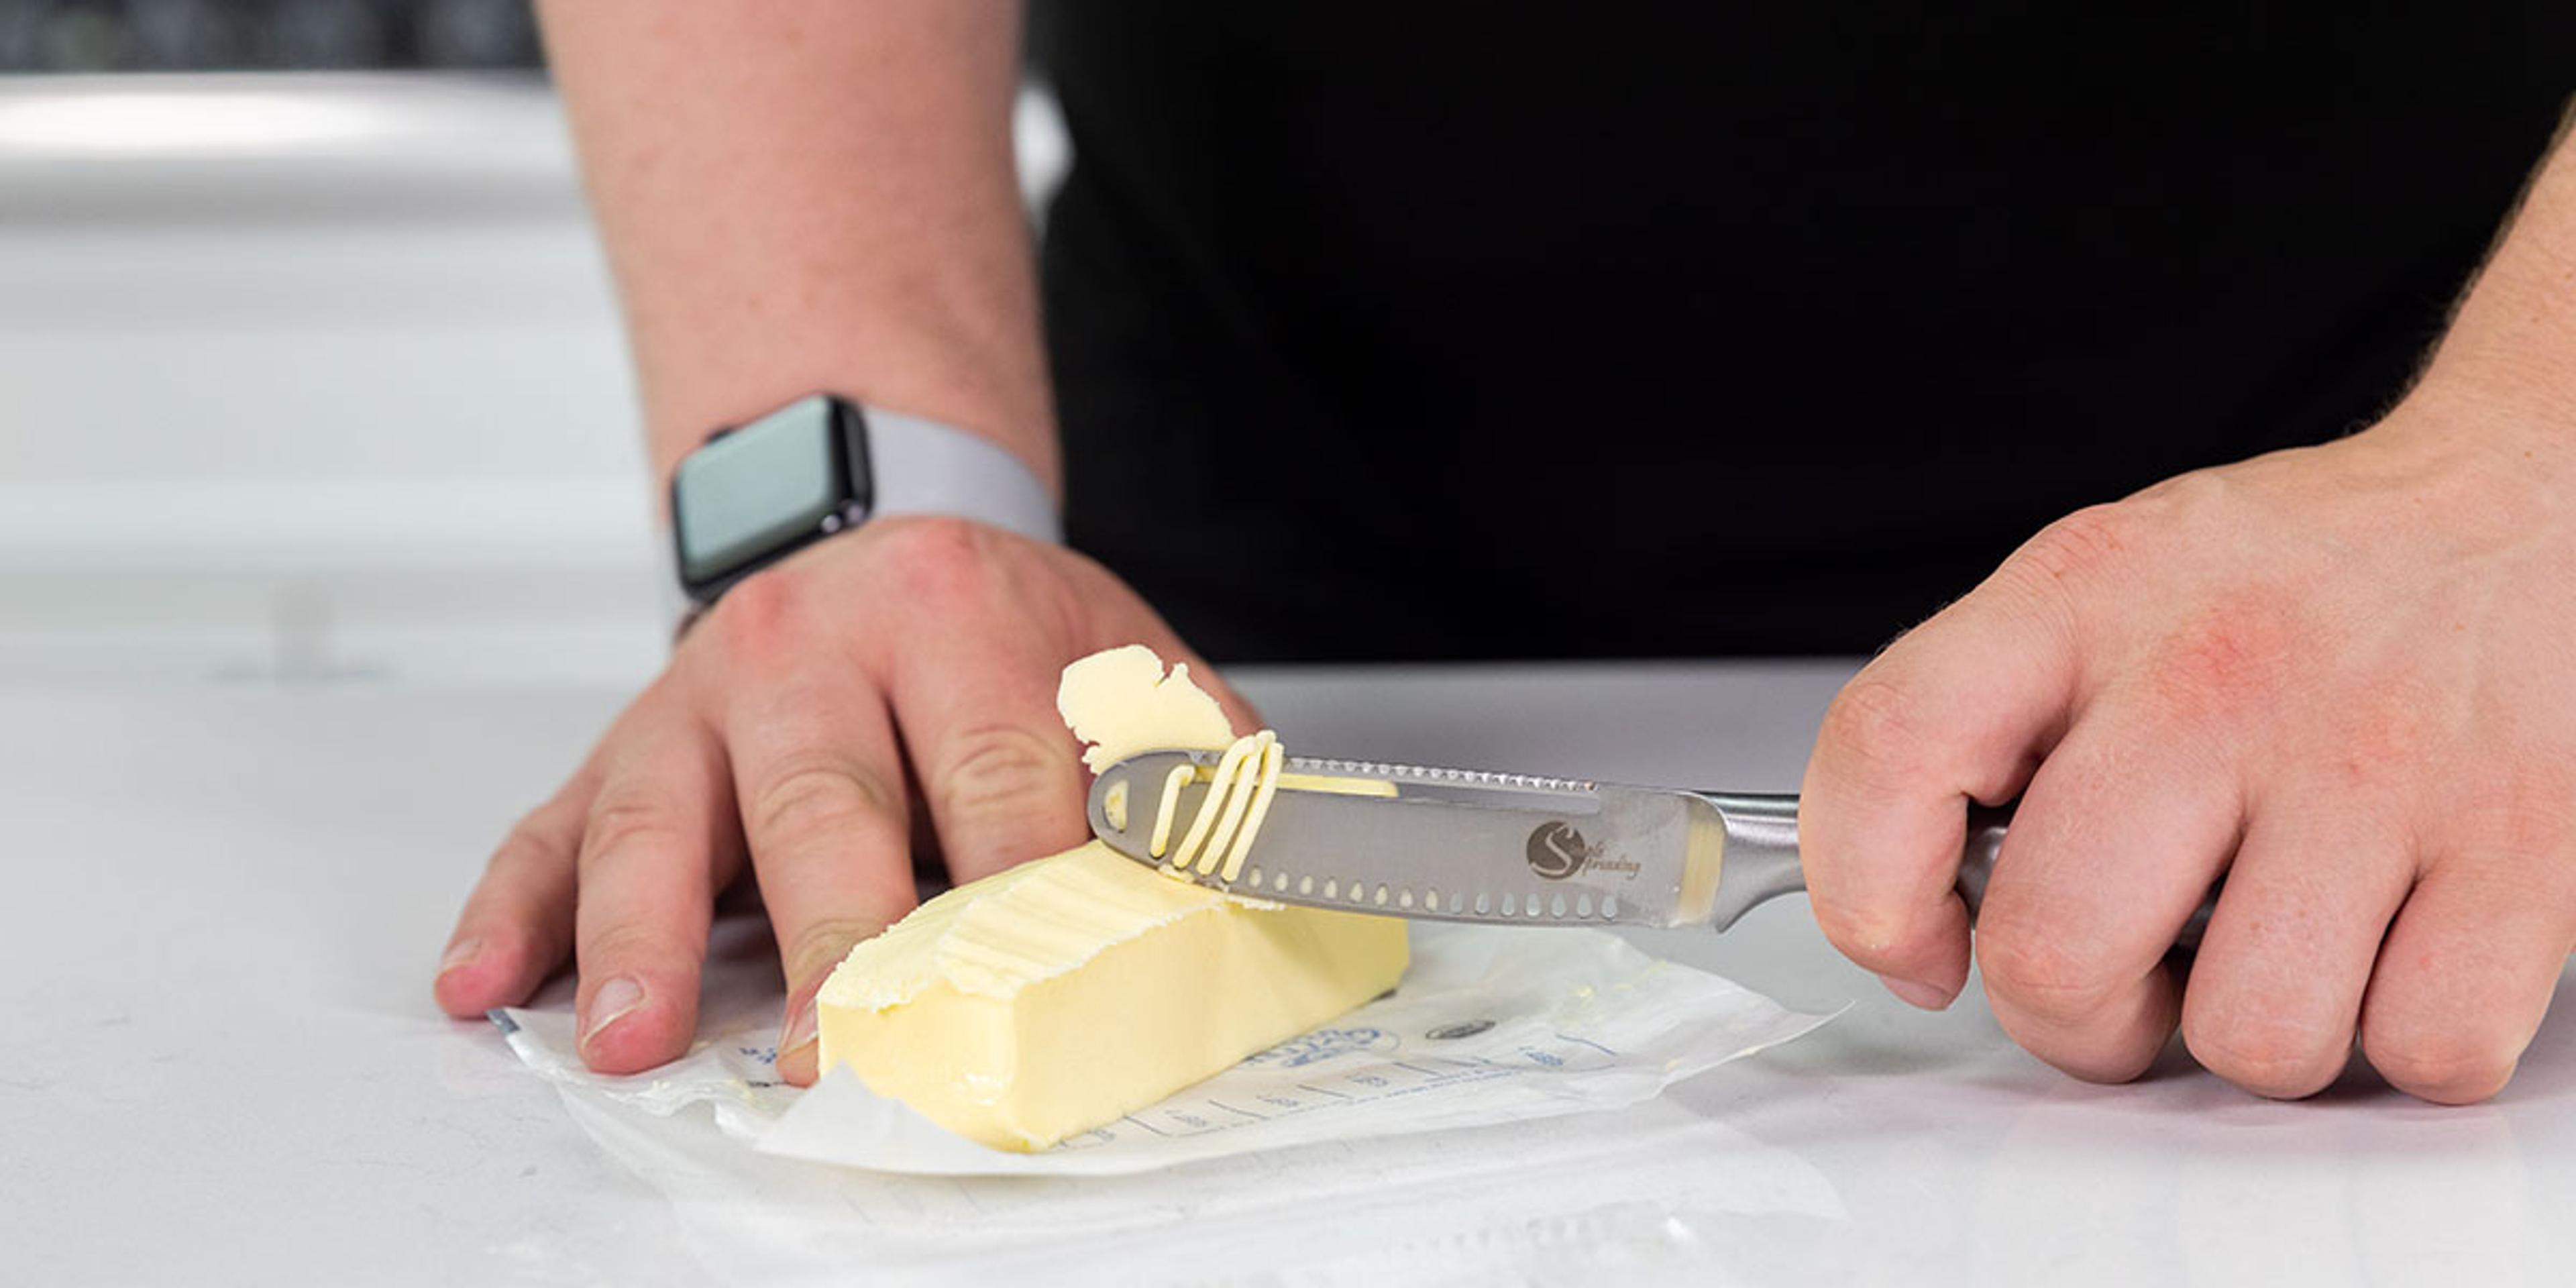 A man uses a butter spreader and curler on organic butter.